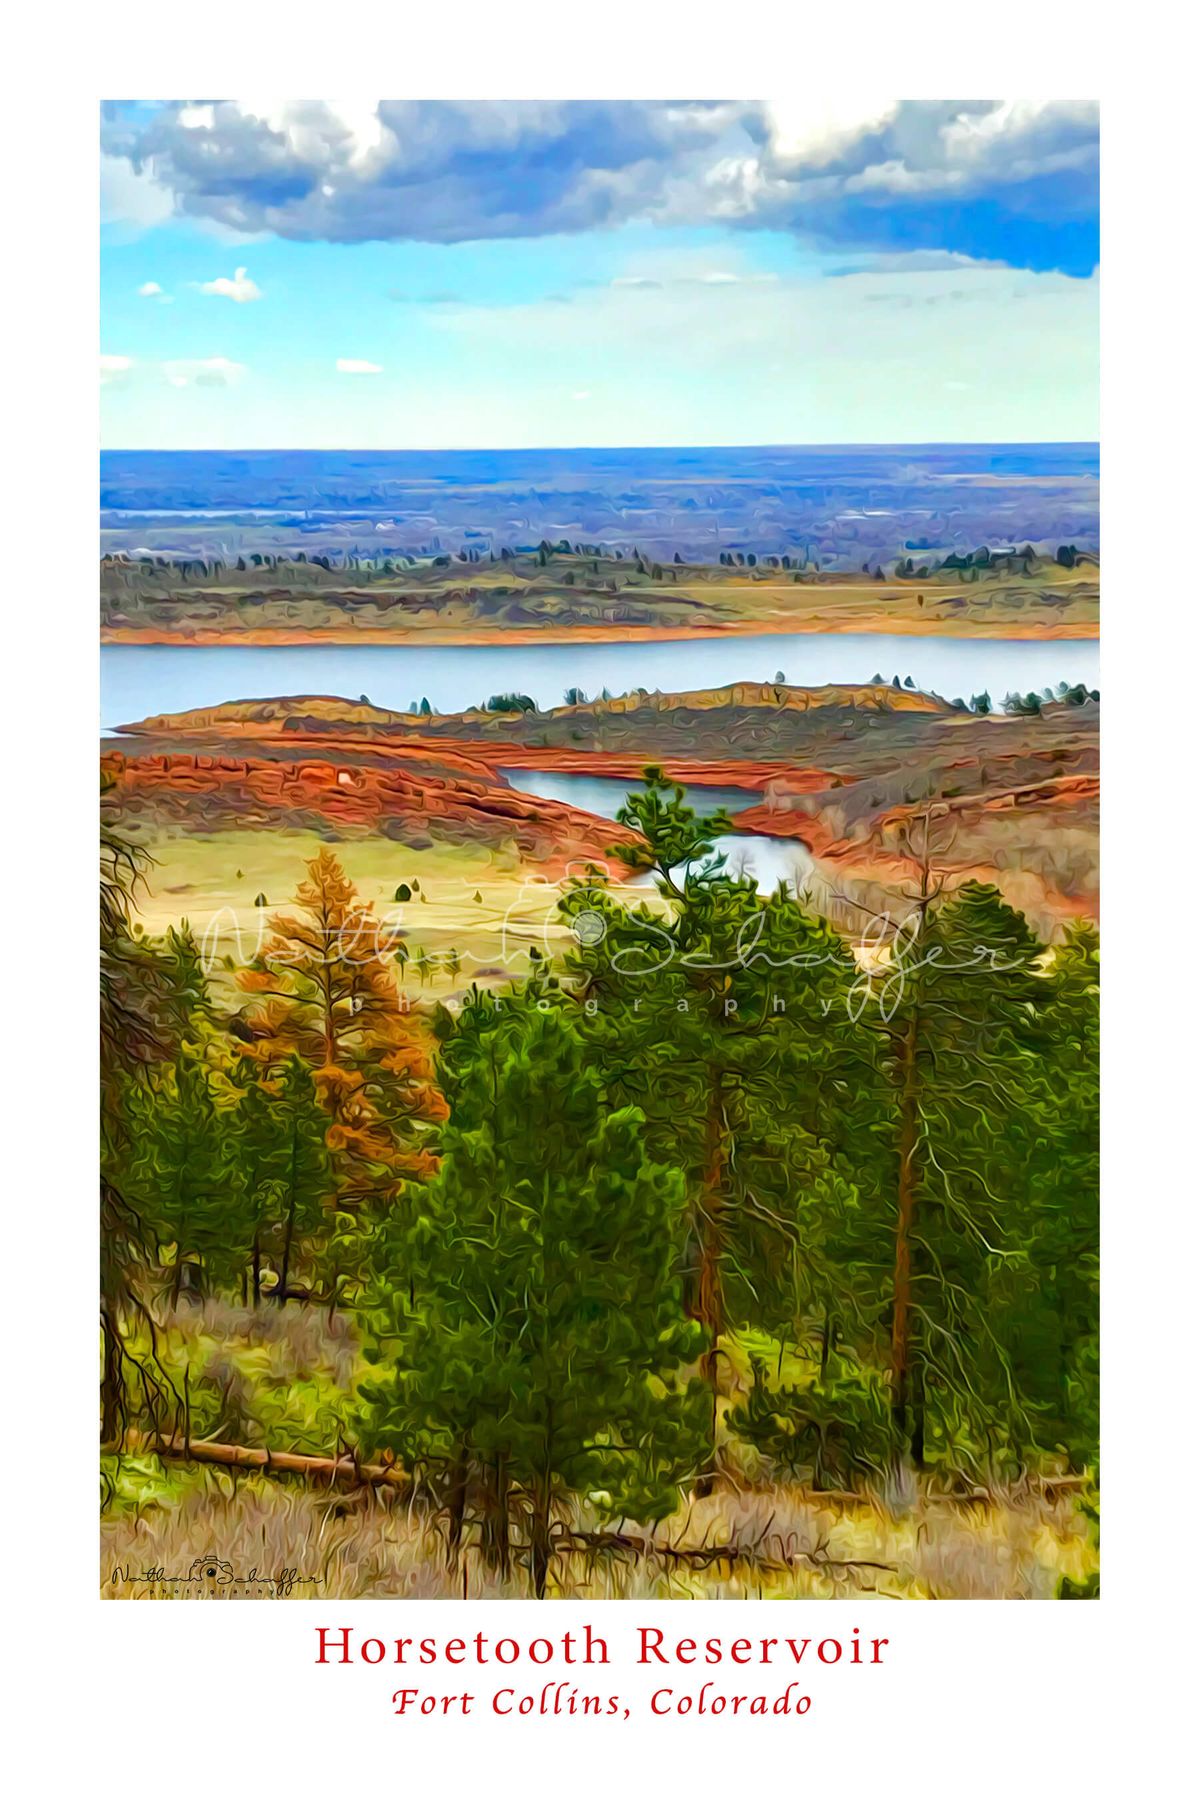 Horsetooth-Res-from-Lory-St-Pk-w-border-and-watermark-6x9-5d407655adc79.jpg